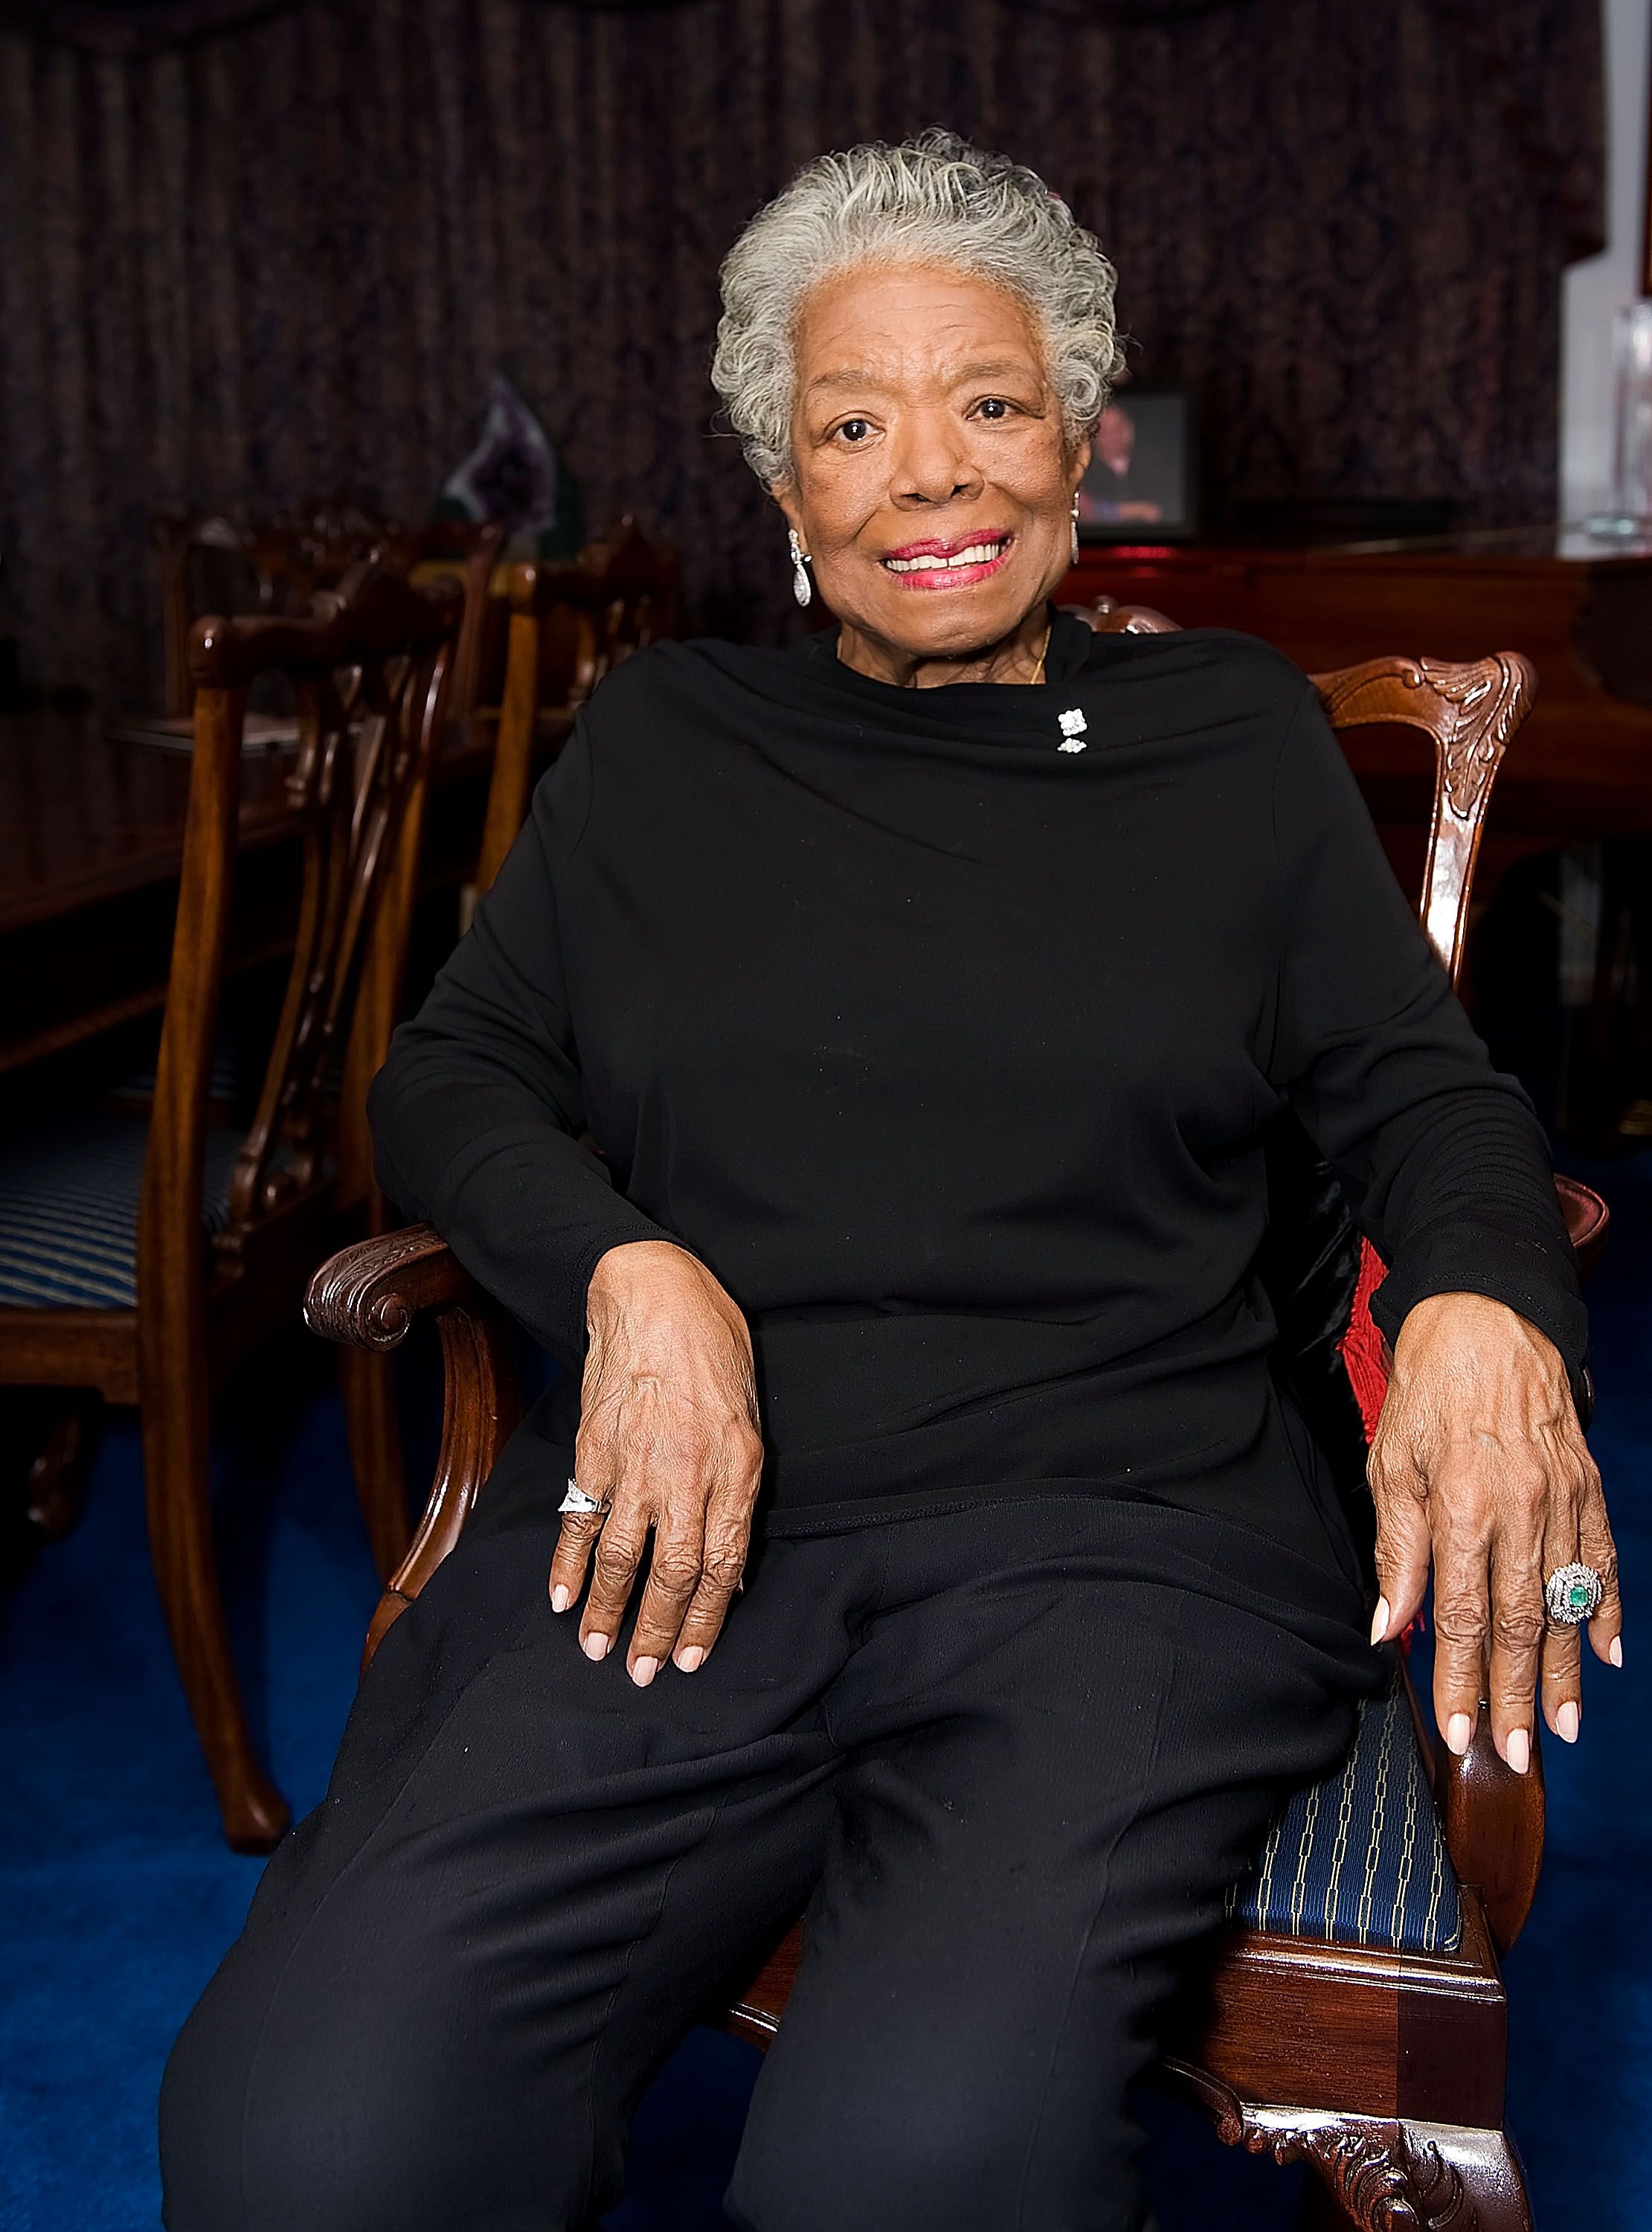 Maya Angelou during the Special Recognition Event for Dr. Maya Angelou at Dr. Angelou's home June 21, 2010 in Winston-Salem, North Carolina. | Source: Getty Images